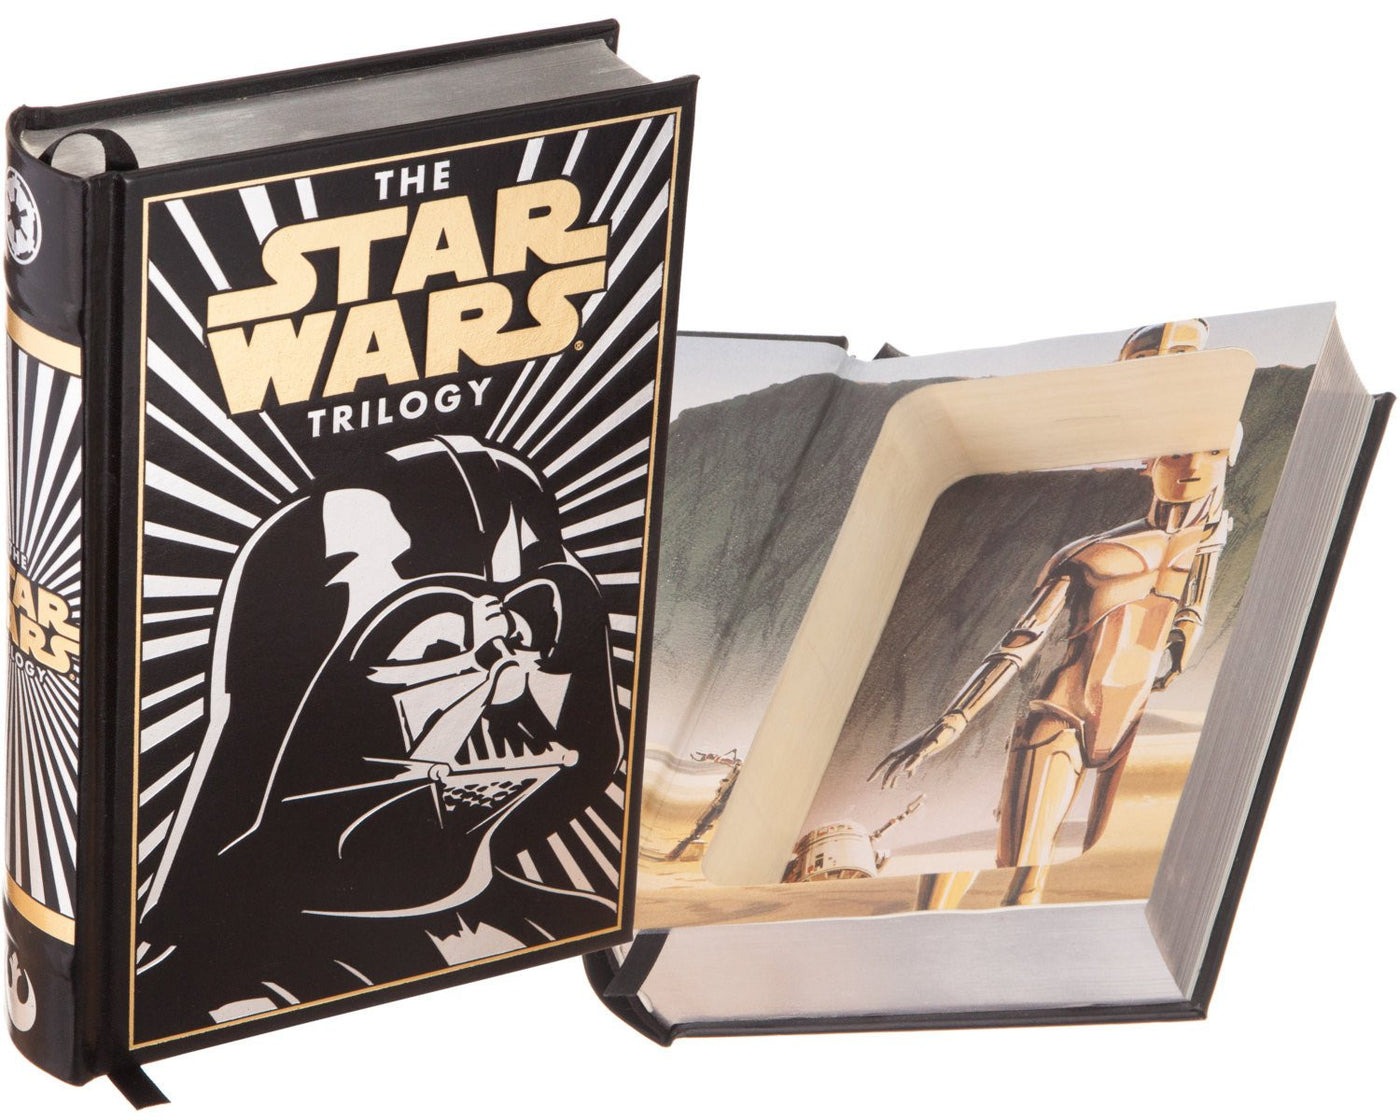 Star Wars Who's Who: A Pocket Guide To The Characters Of The Star Wars  Trilogy